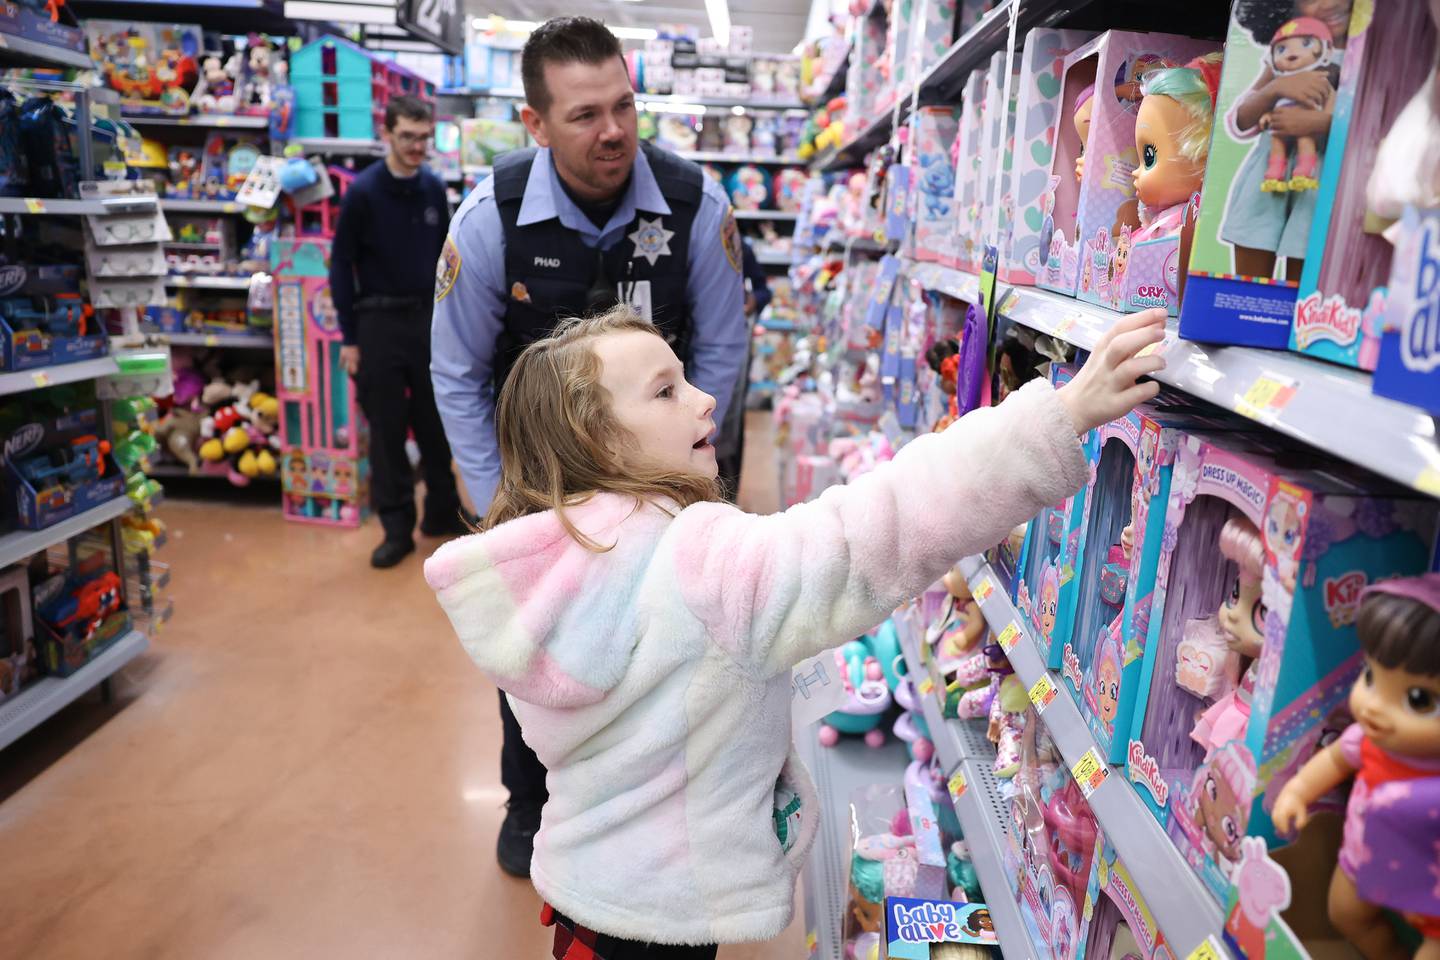 Vivian, 8, picks out a doll with Officer Mike Phad at the annual Santa Cop at Walmart in Joliet.